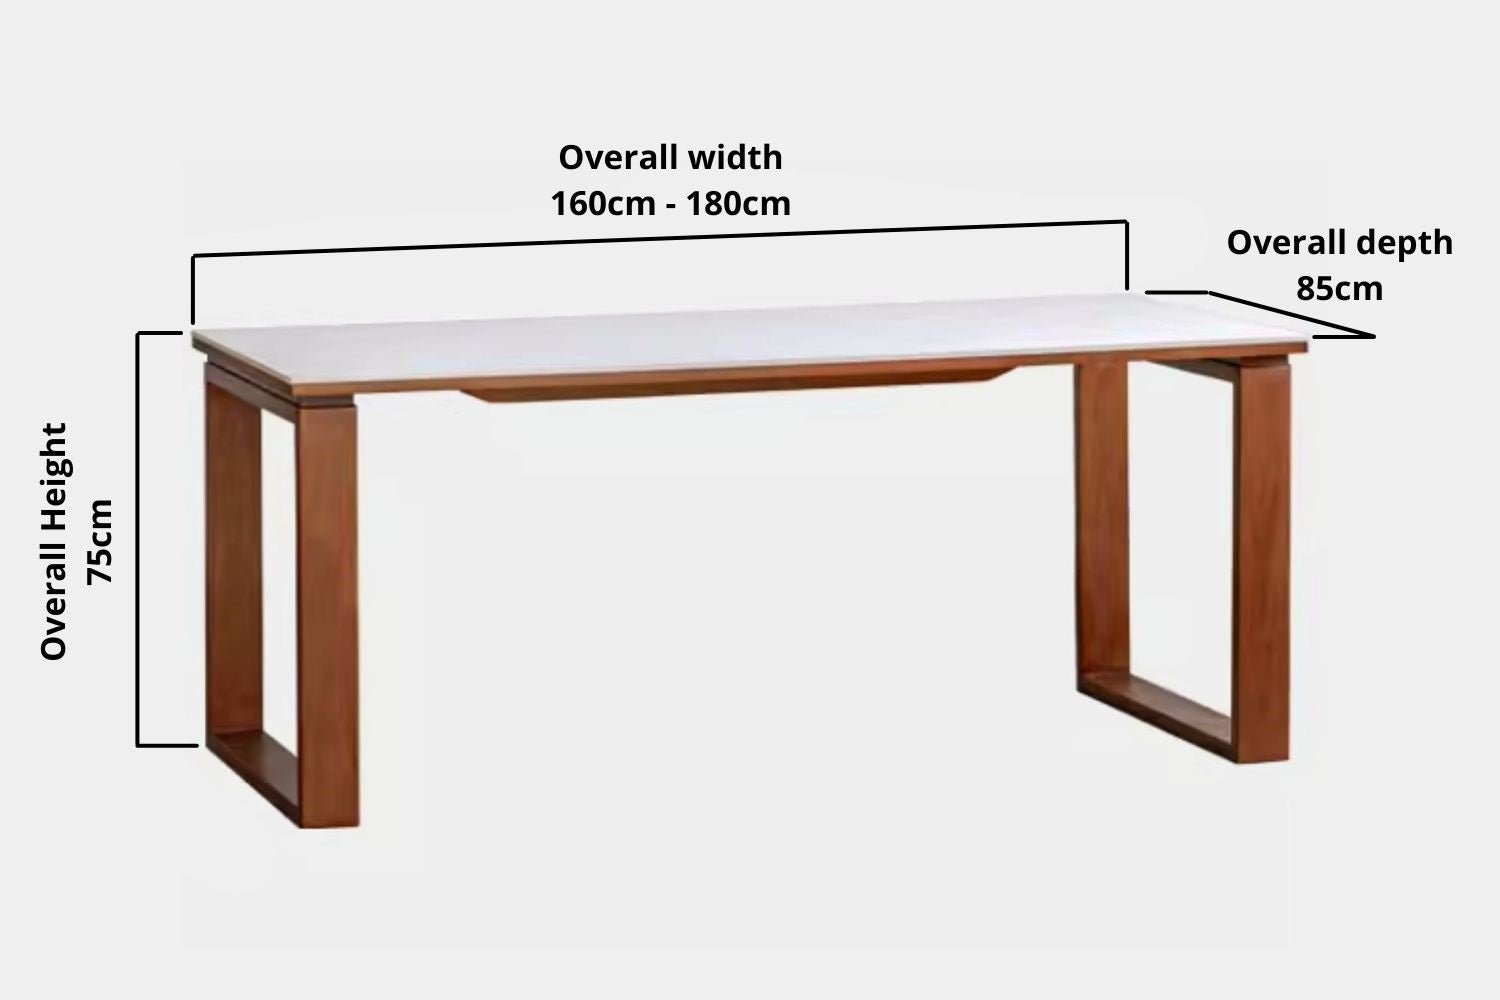 Key product dimensions such as depth, width and height for Tanner Sintered Stone Dining Table Set